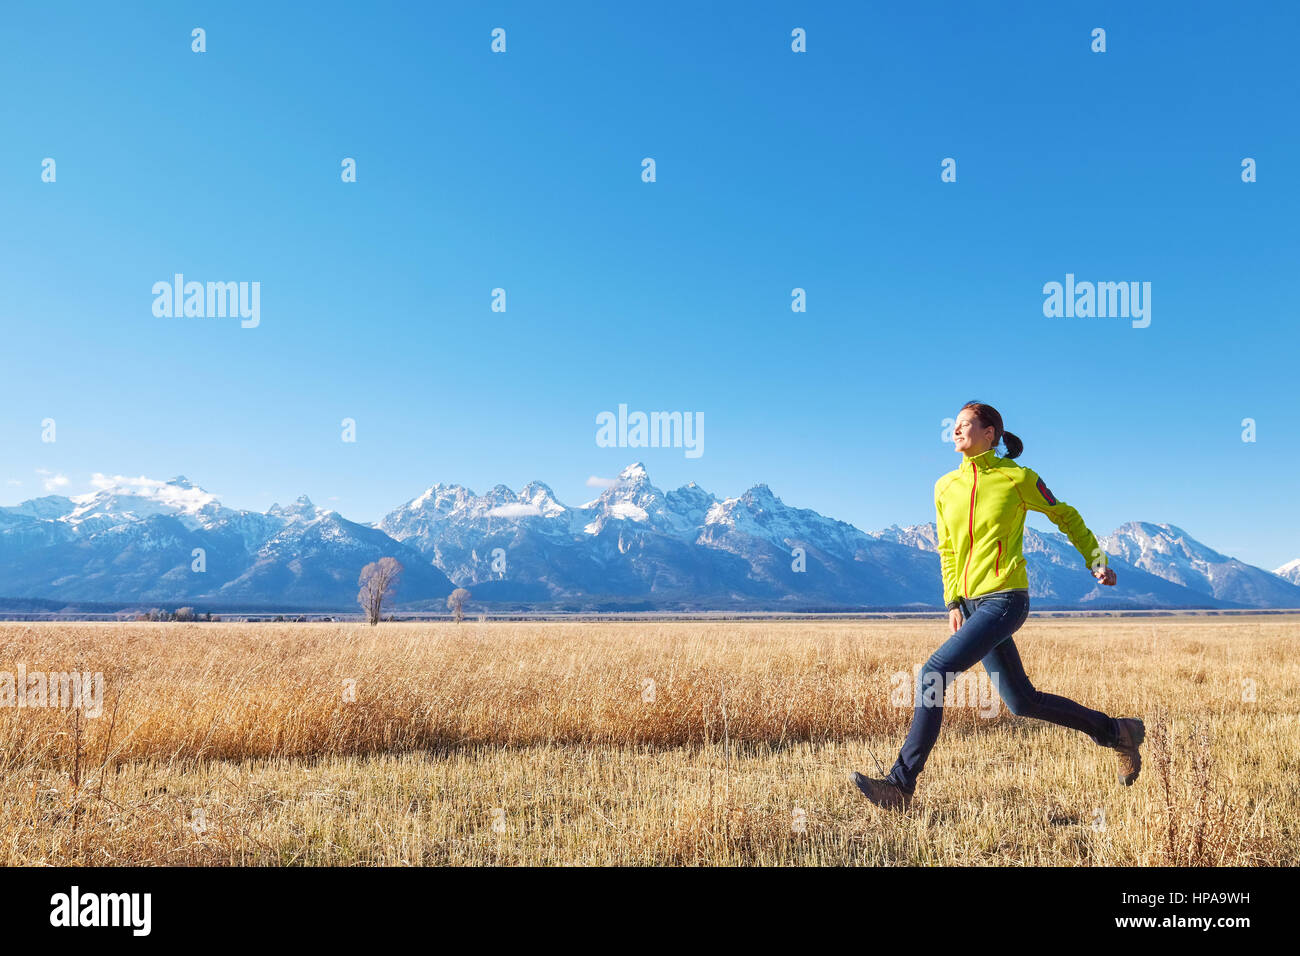 Happy young woman runs on a meadow at sunset, Grand Teton mountain range in distance, Grand Teton National Park, Wyoming, USA. Stock Photo